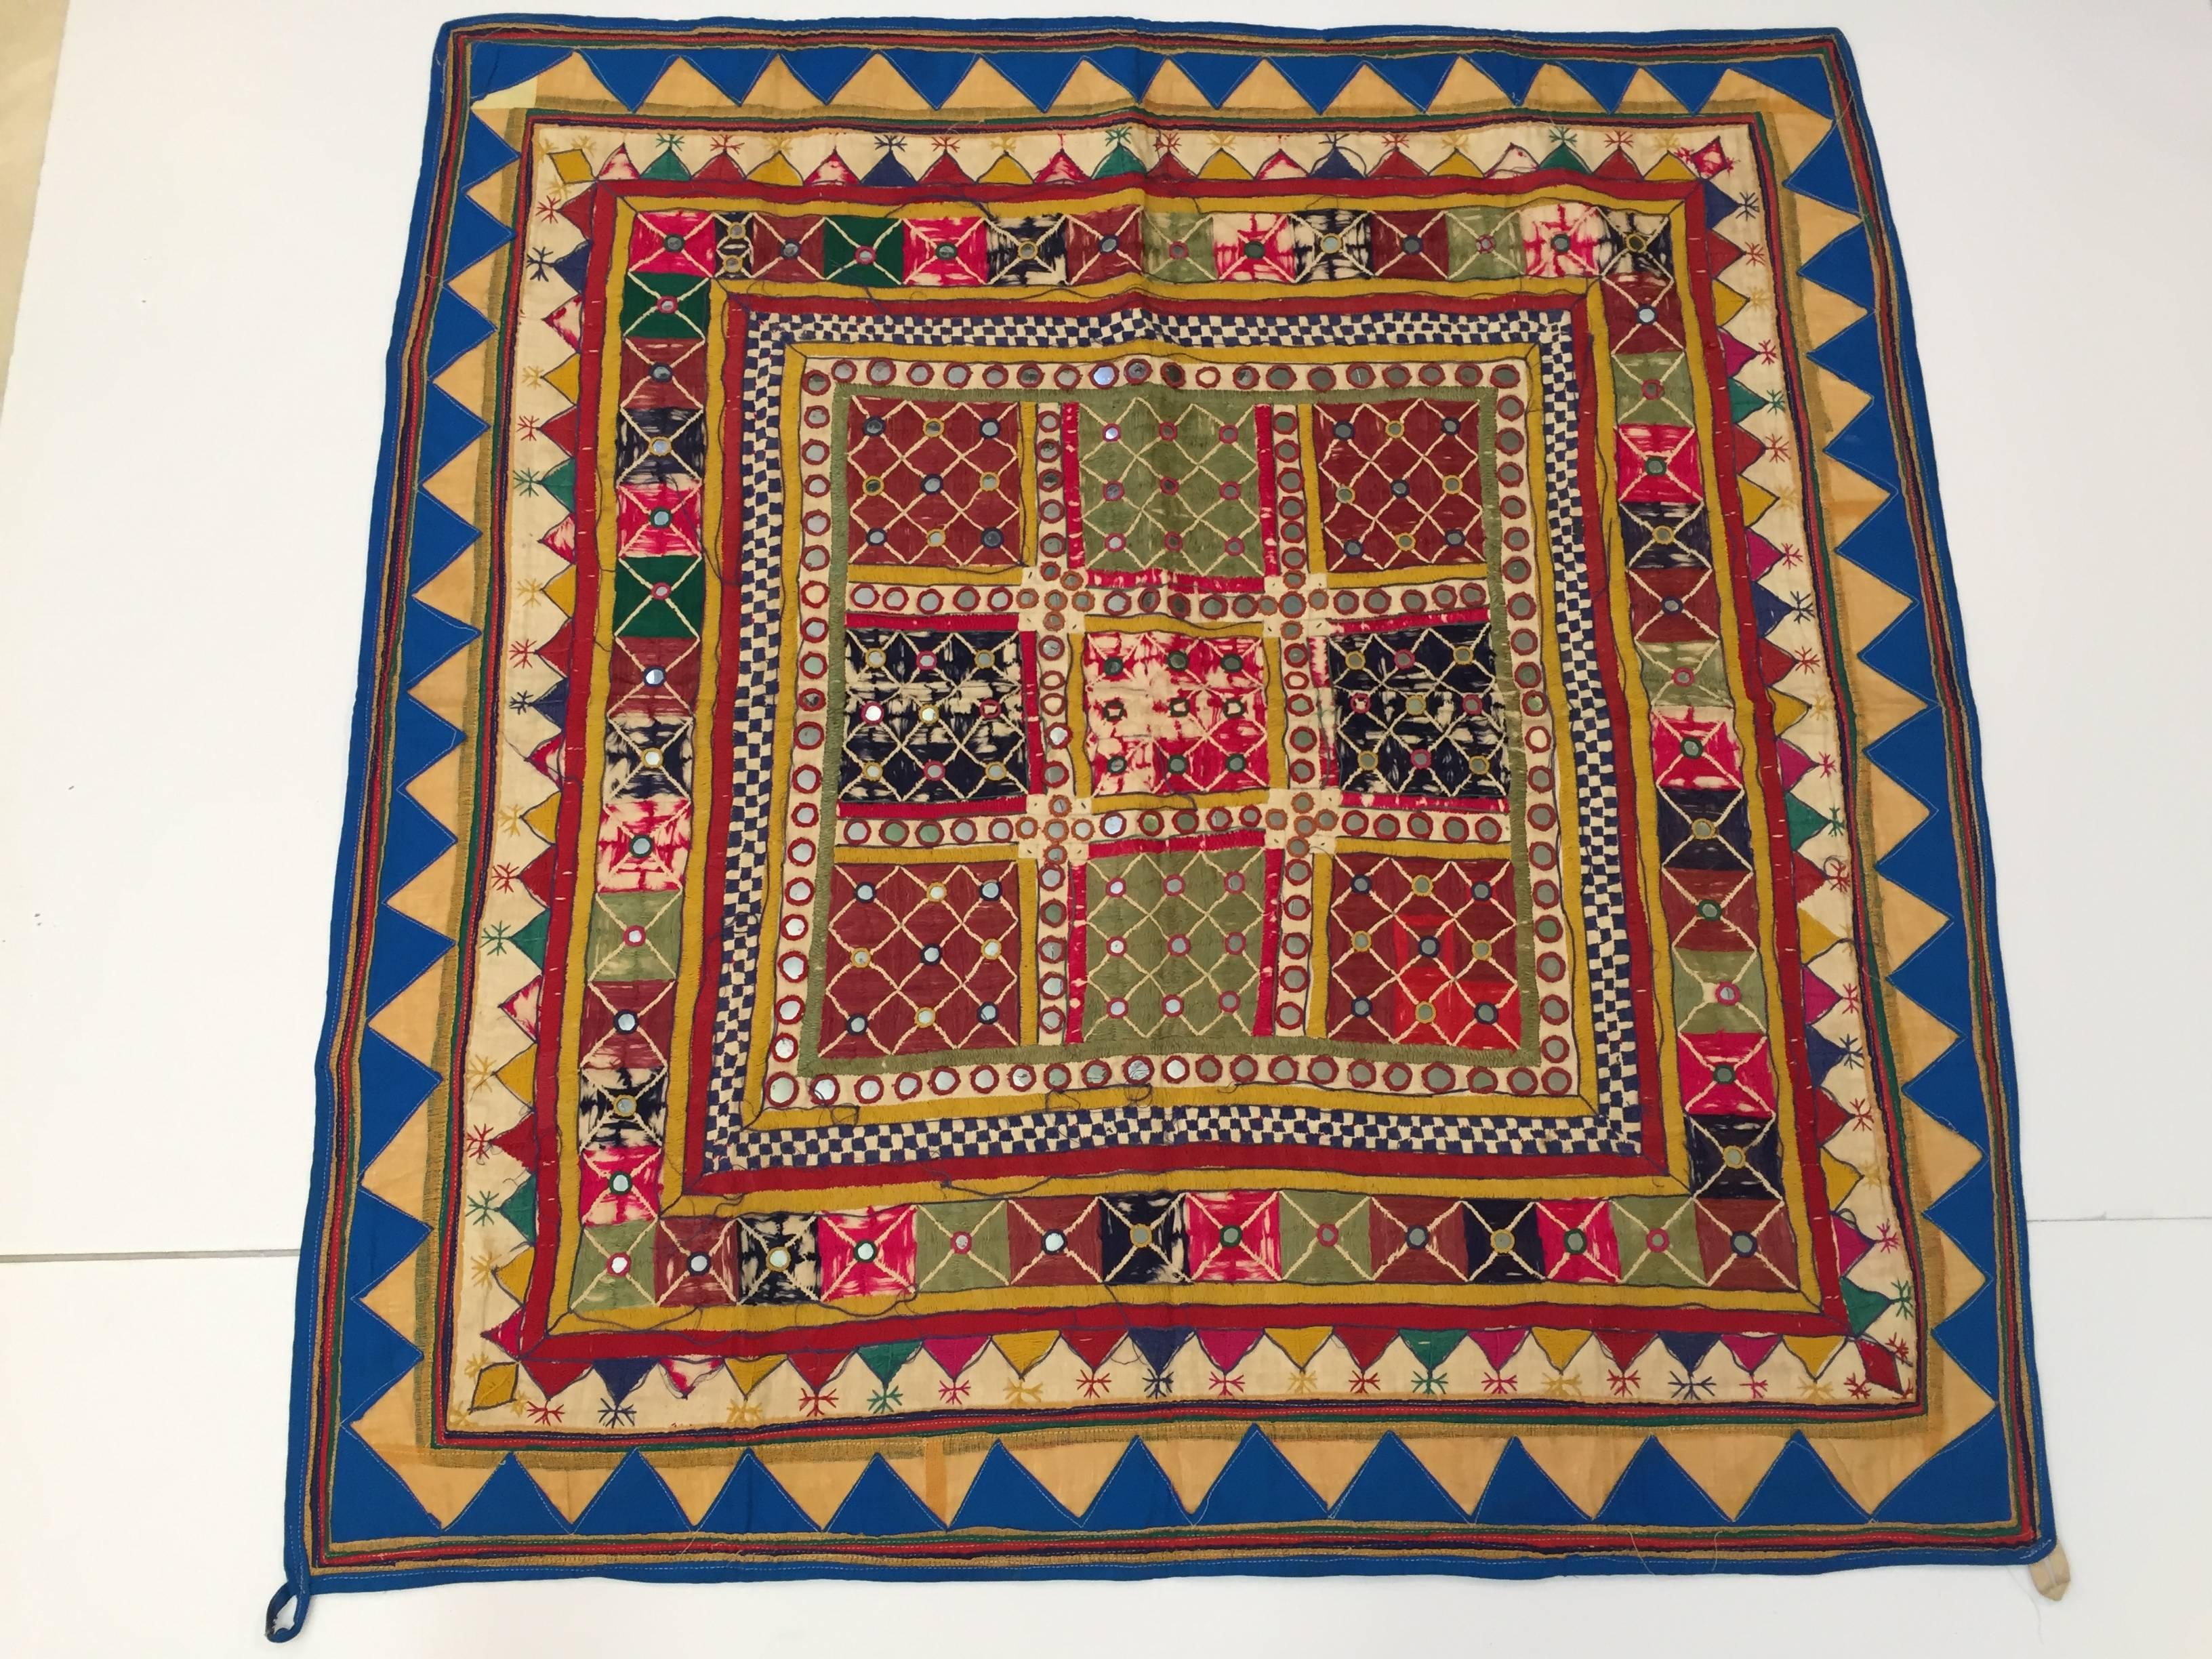 Hand-Crafted Embroidered Ceremonial Chakla Cloth Textile